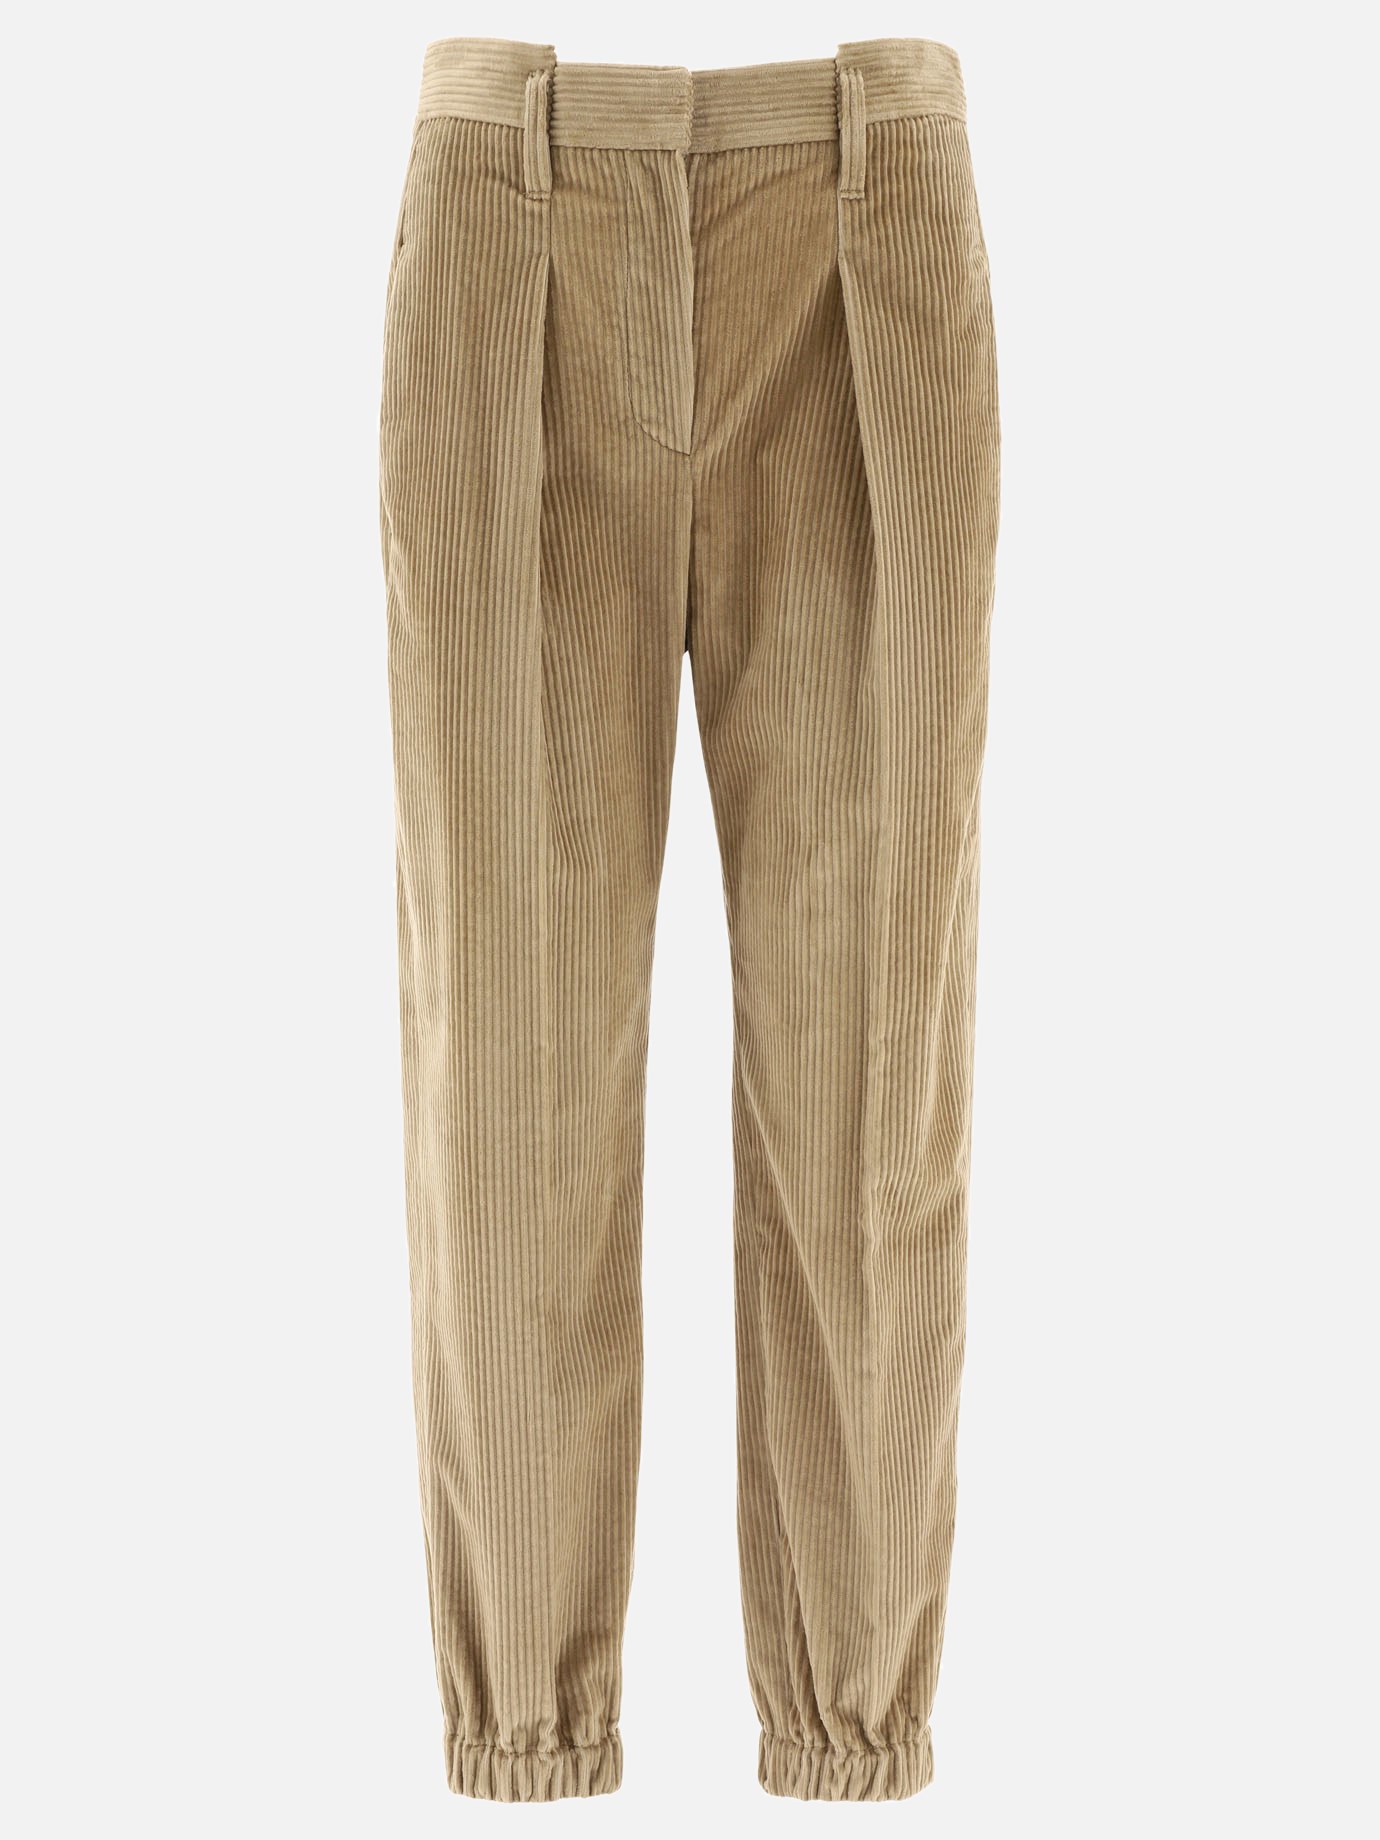 Ribbed stretch trousers